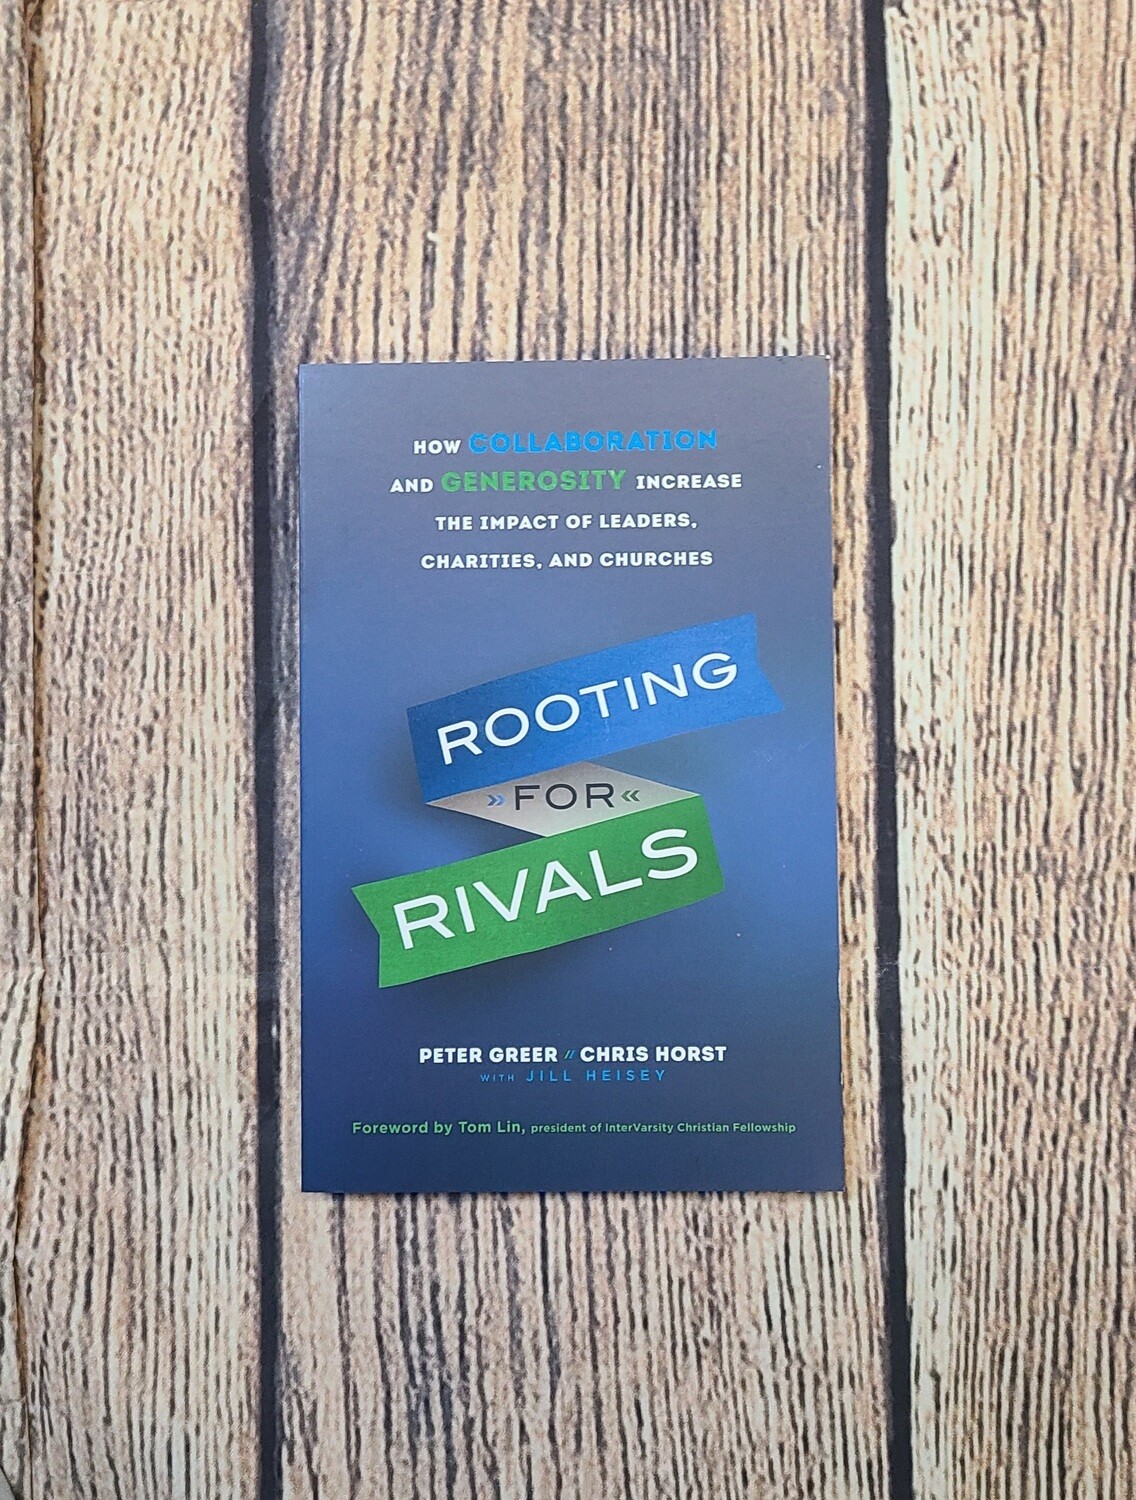 Rooting for Rivals: How Collaboration and Generosity Increase the Impact of Leaders, Charities, and Churches by Peter Greer and Chris Horst with Jill Heisey